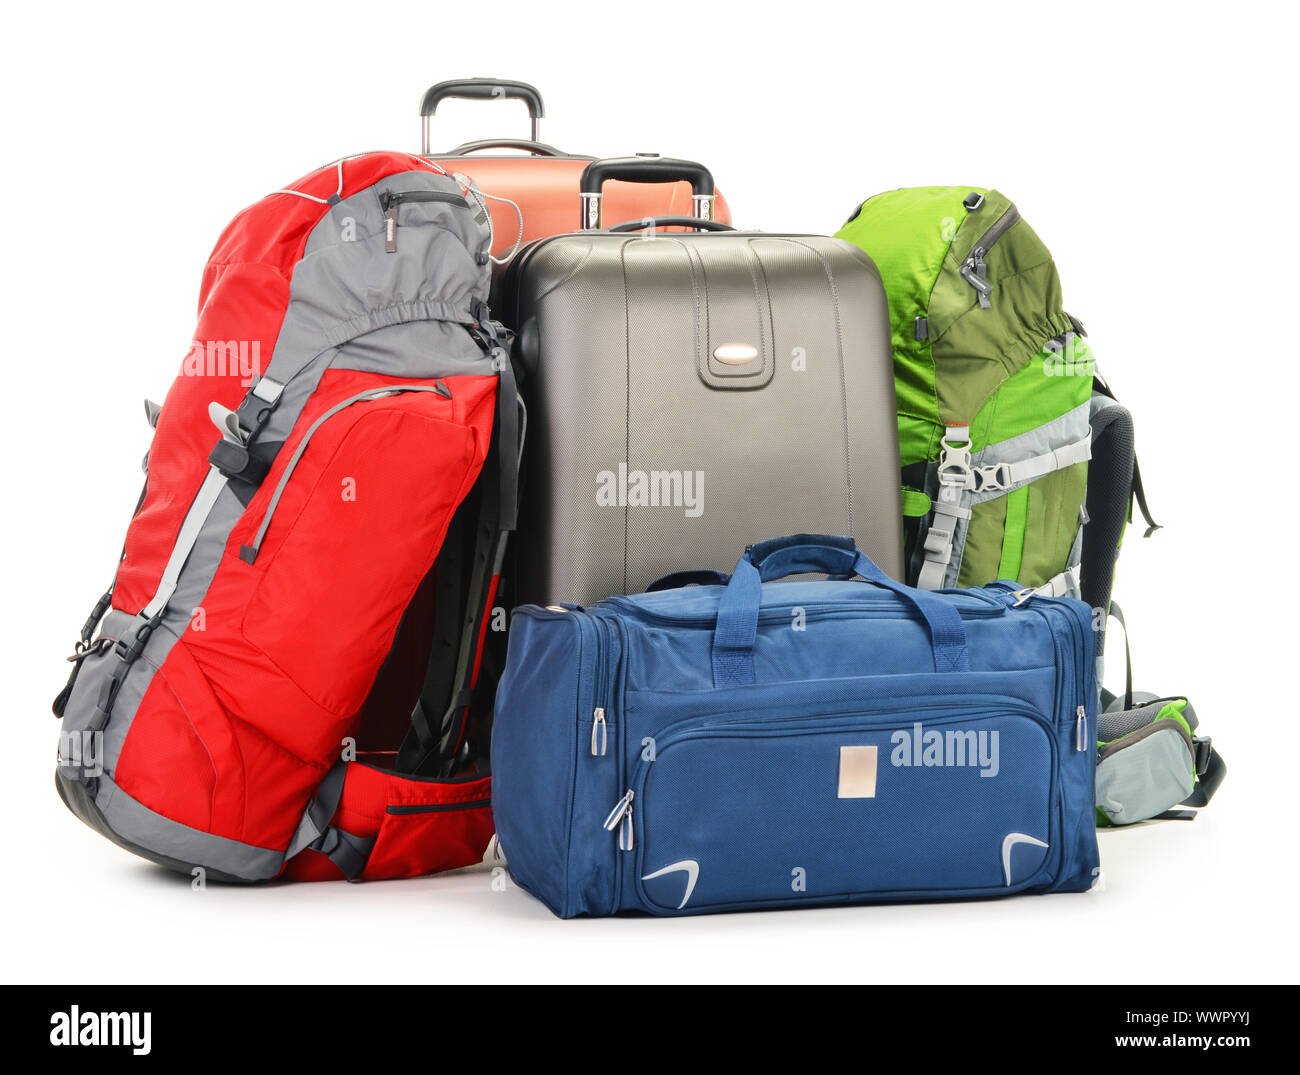 Luggage consisting of large suitcases rucksack and travel bag isolated on white Stock Photo